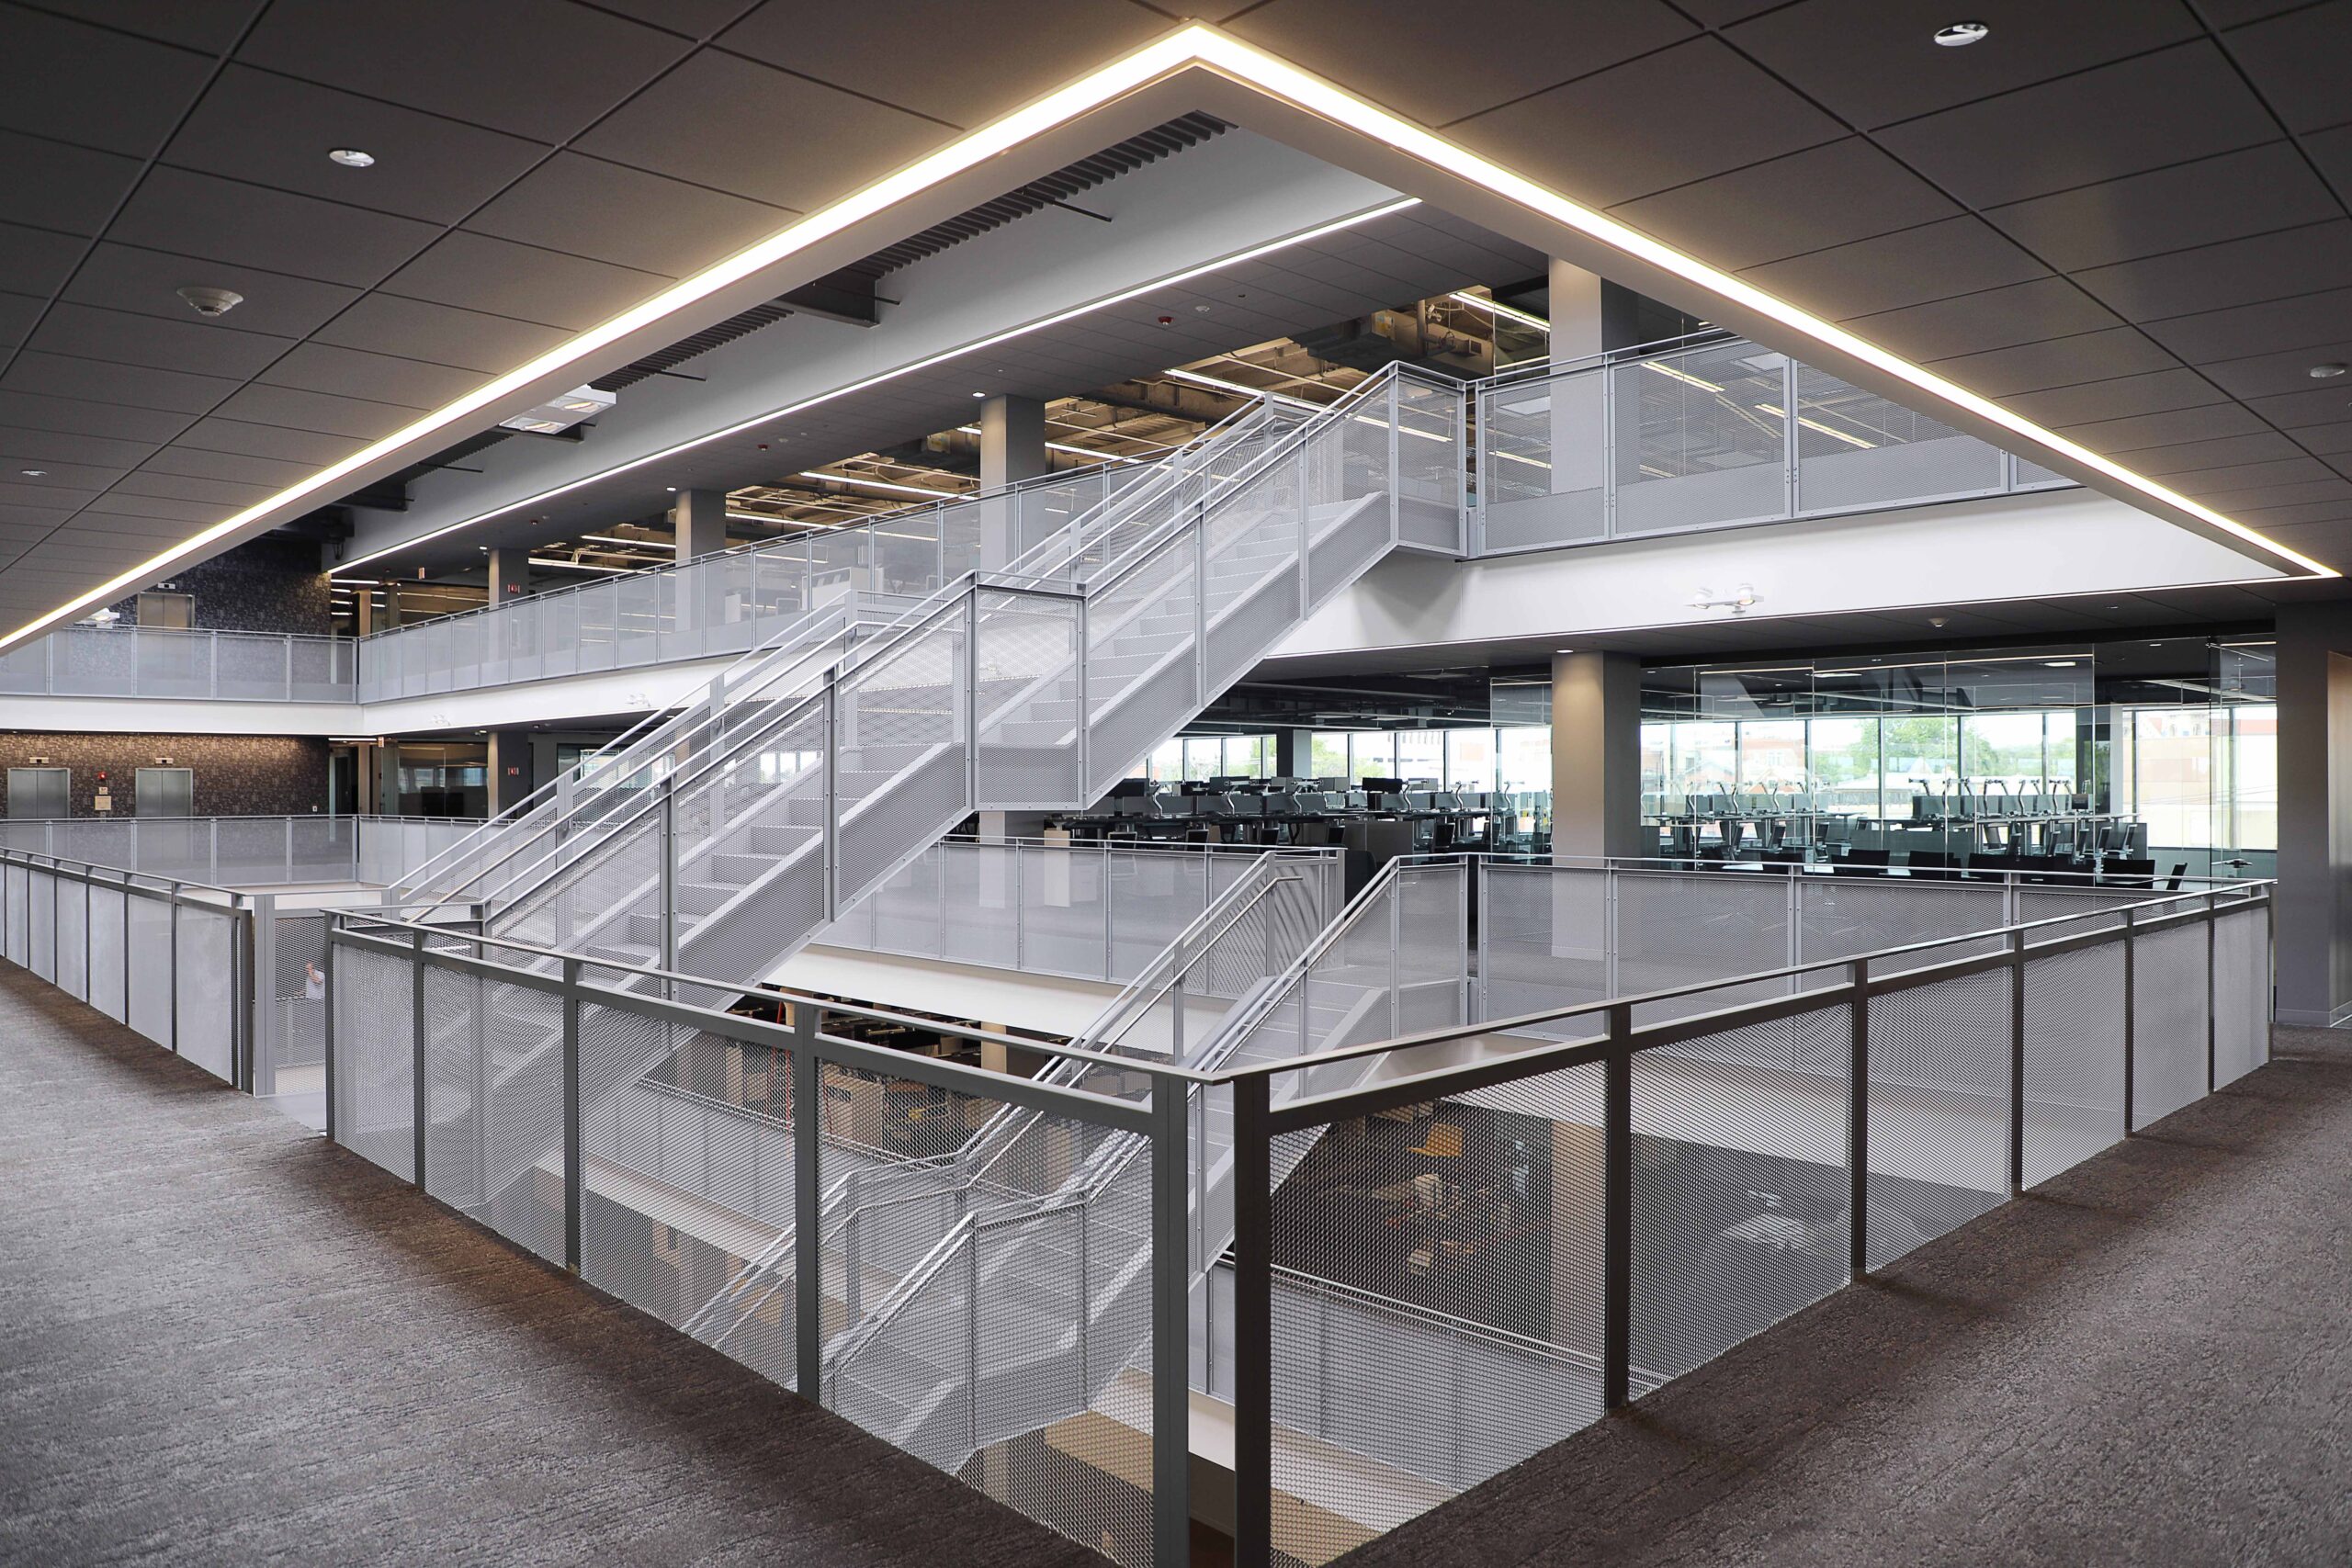 Skender Completes Interior Construction of New 207,000-square-foot C.H. Robinson Office in Chicago’s Lincoln Yards Development